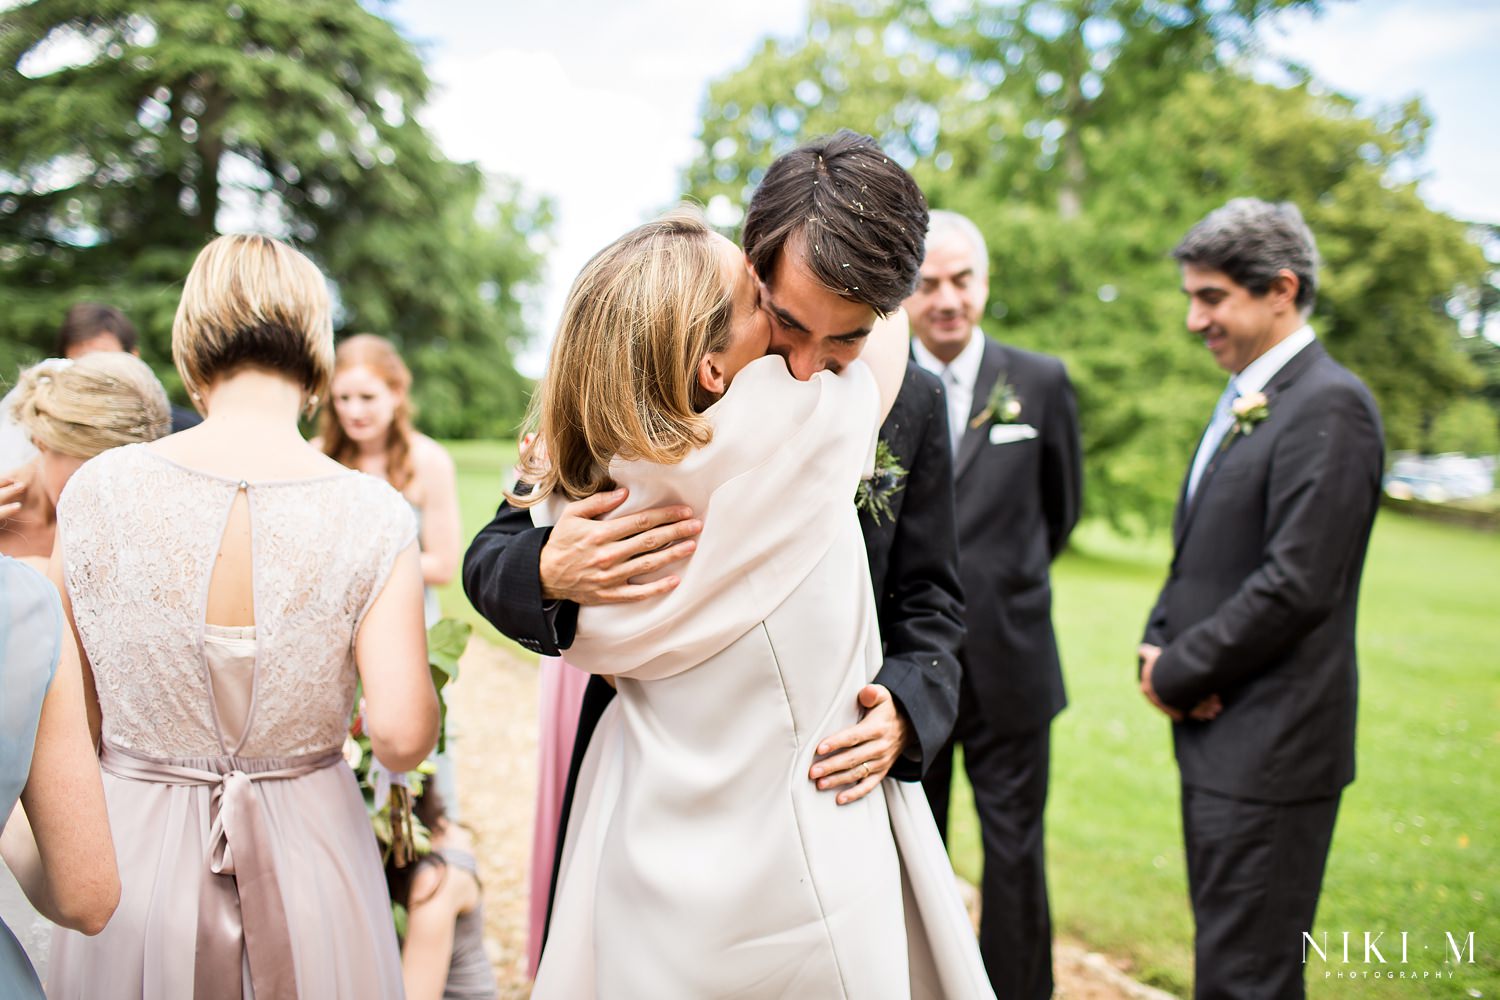 Couple are congratulated after their marriage ceremony at Chateau de la Bourlie Dordogne Wedding